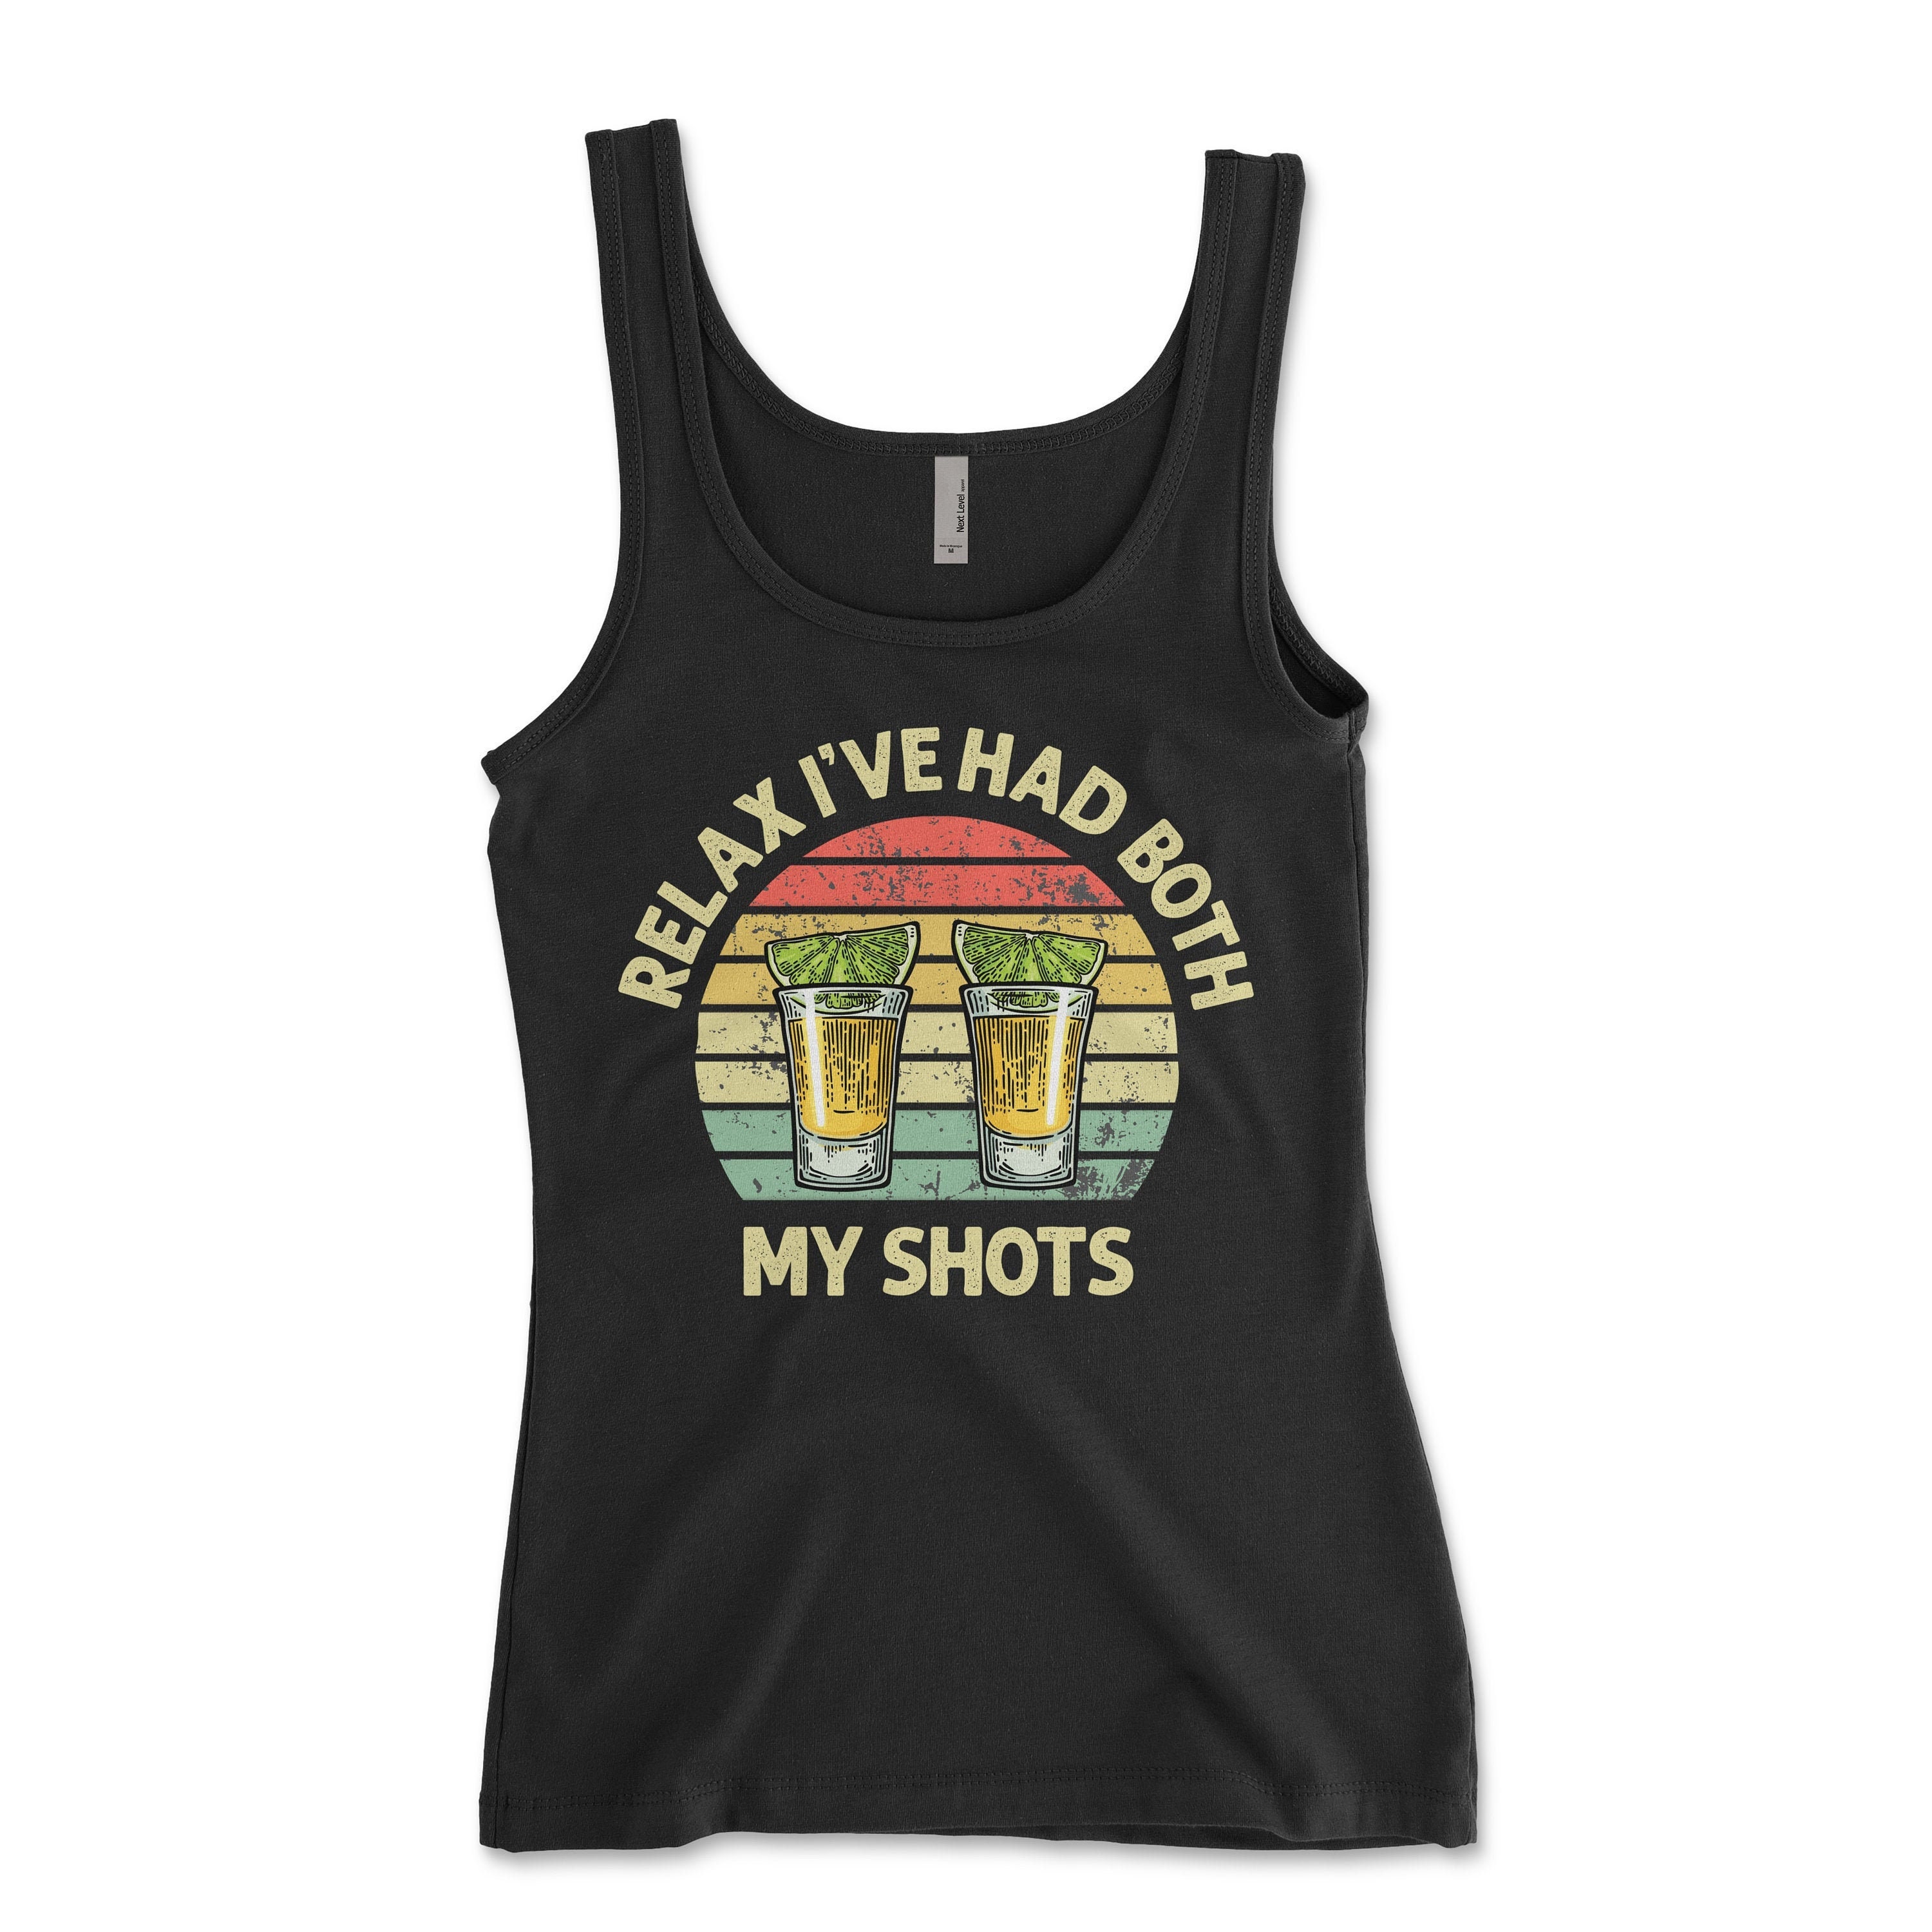 Funny Bartender-Themed Statement Tank Top 